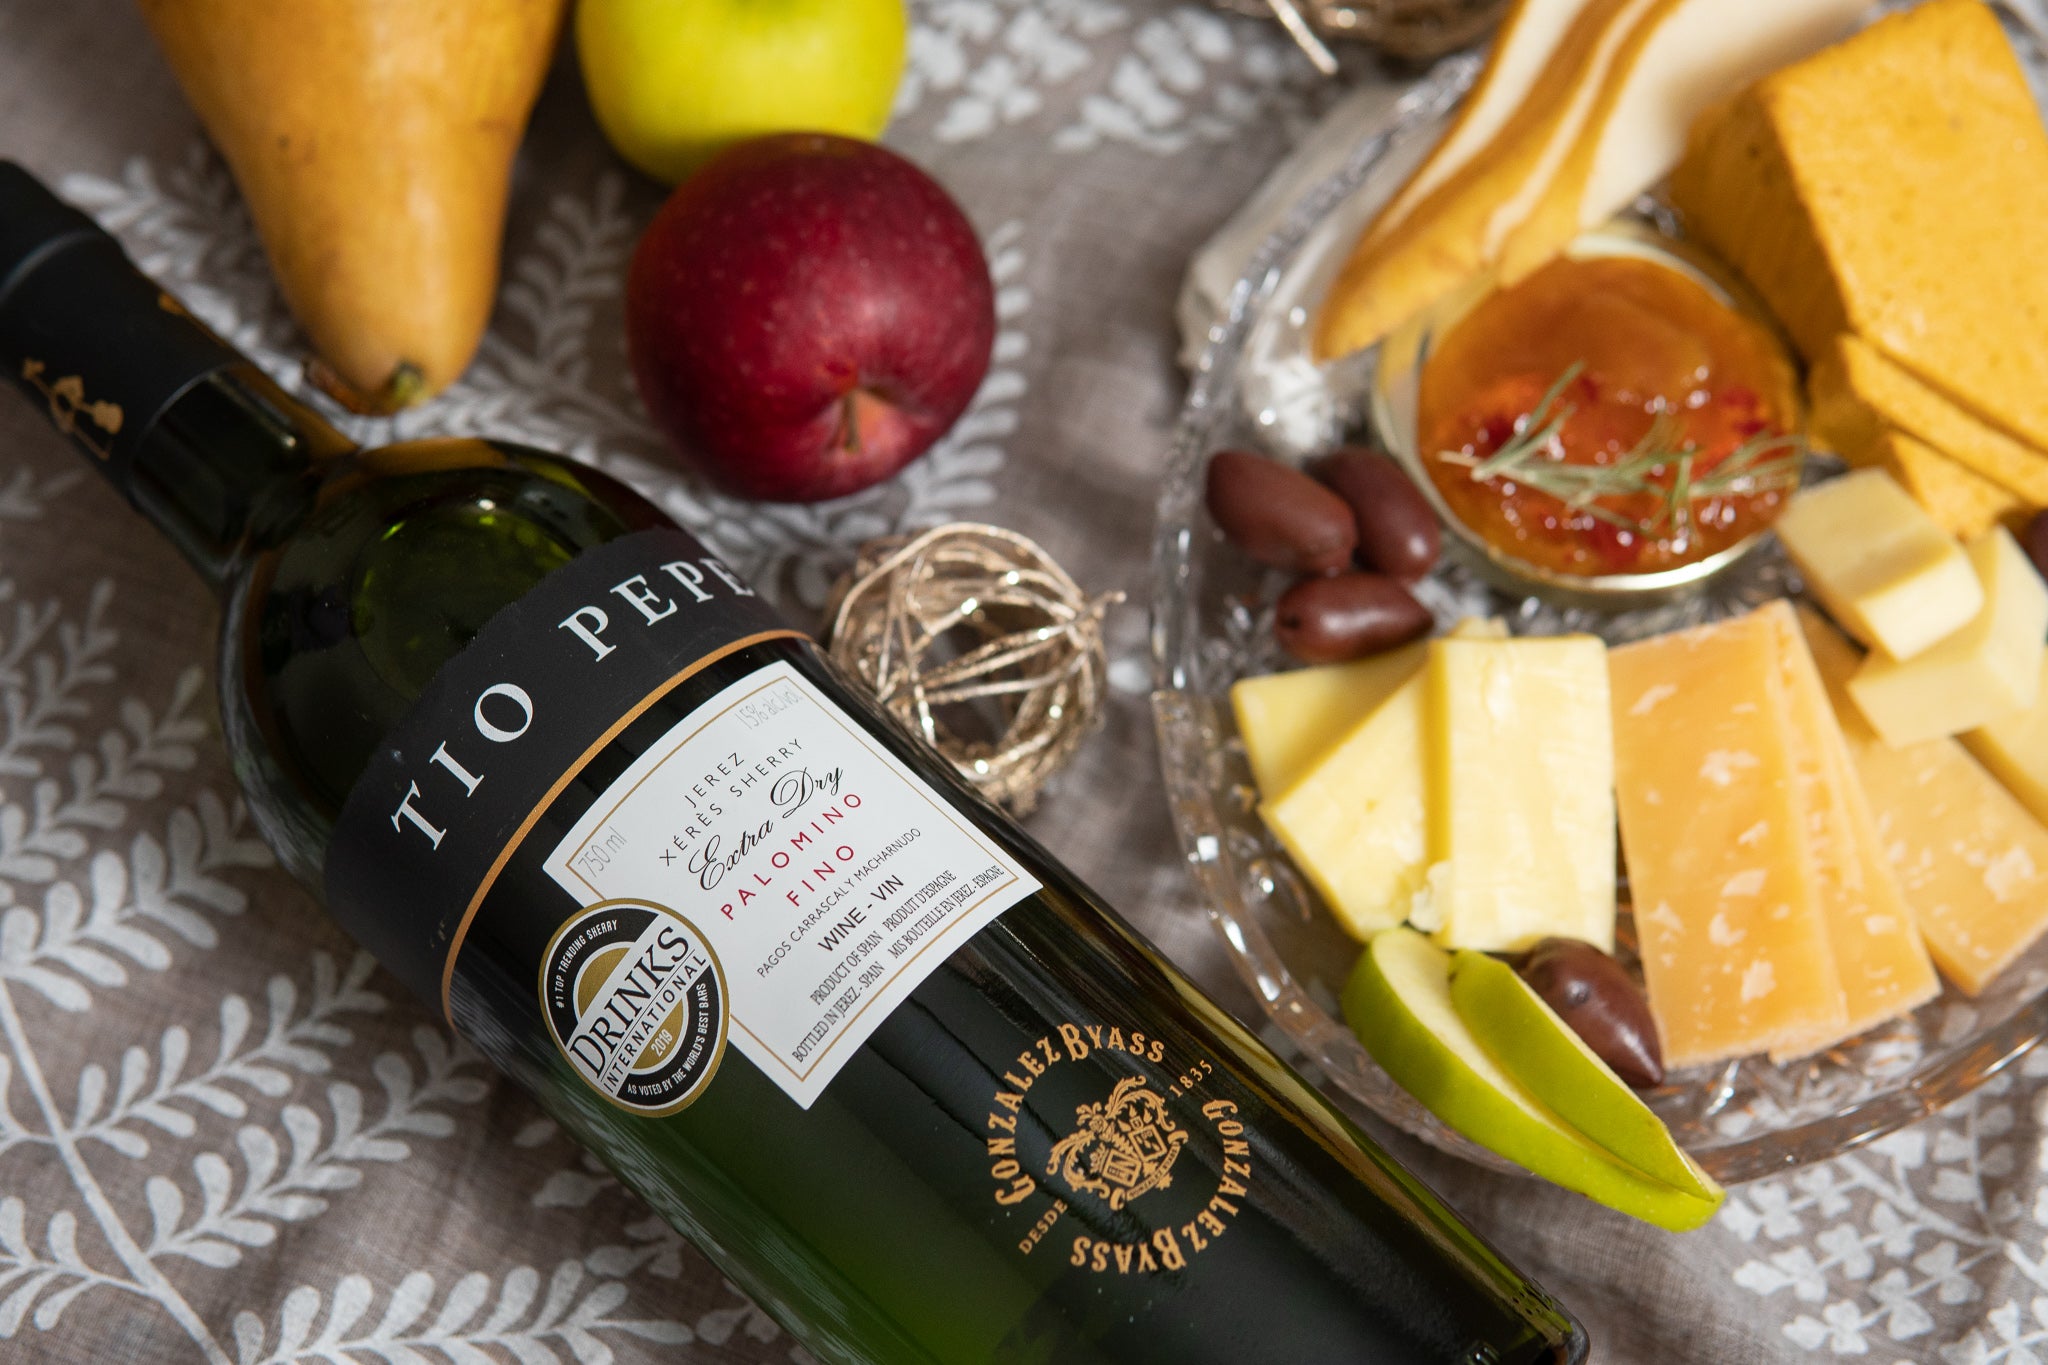 Tio Pepe sherry wine bottle with fresh fruit and a cheese platter